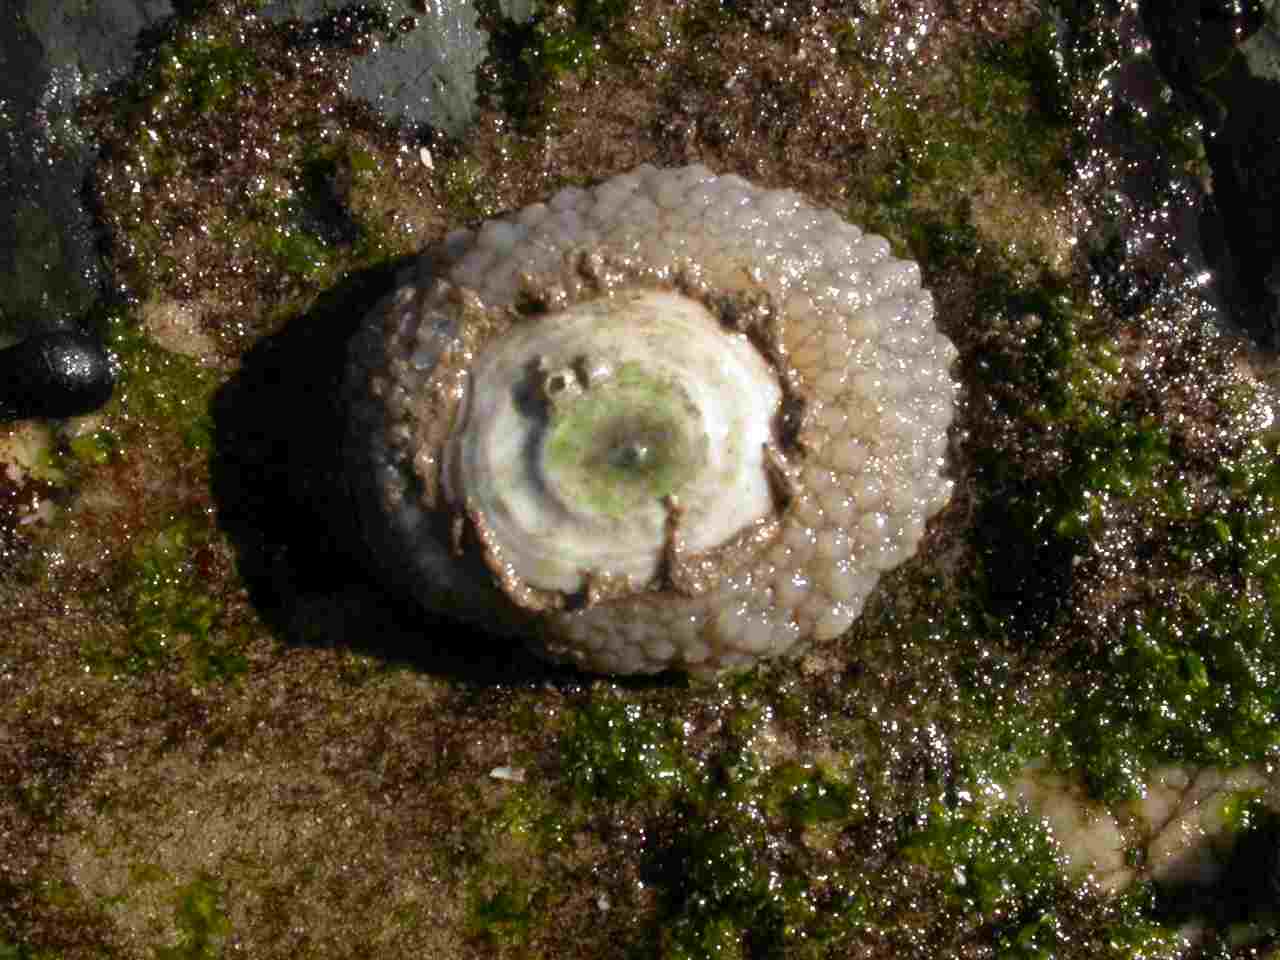 What is a Limpet: False Limpet Shells are Present in Umbrella Slugs (Credit: Harry Rose 2013 .CC BY 2.0.)